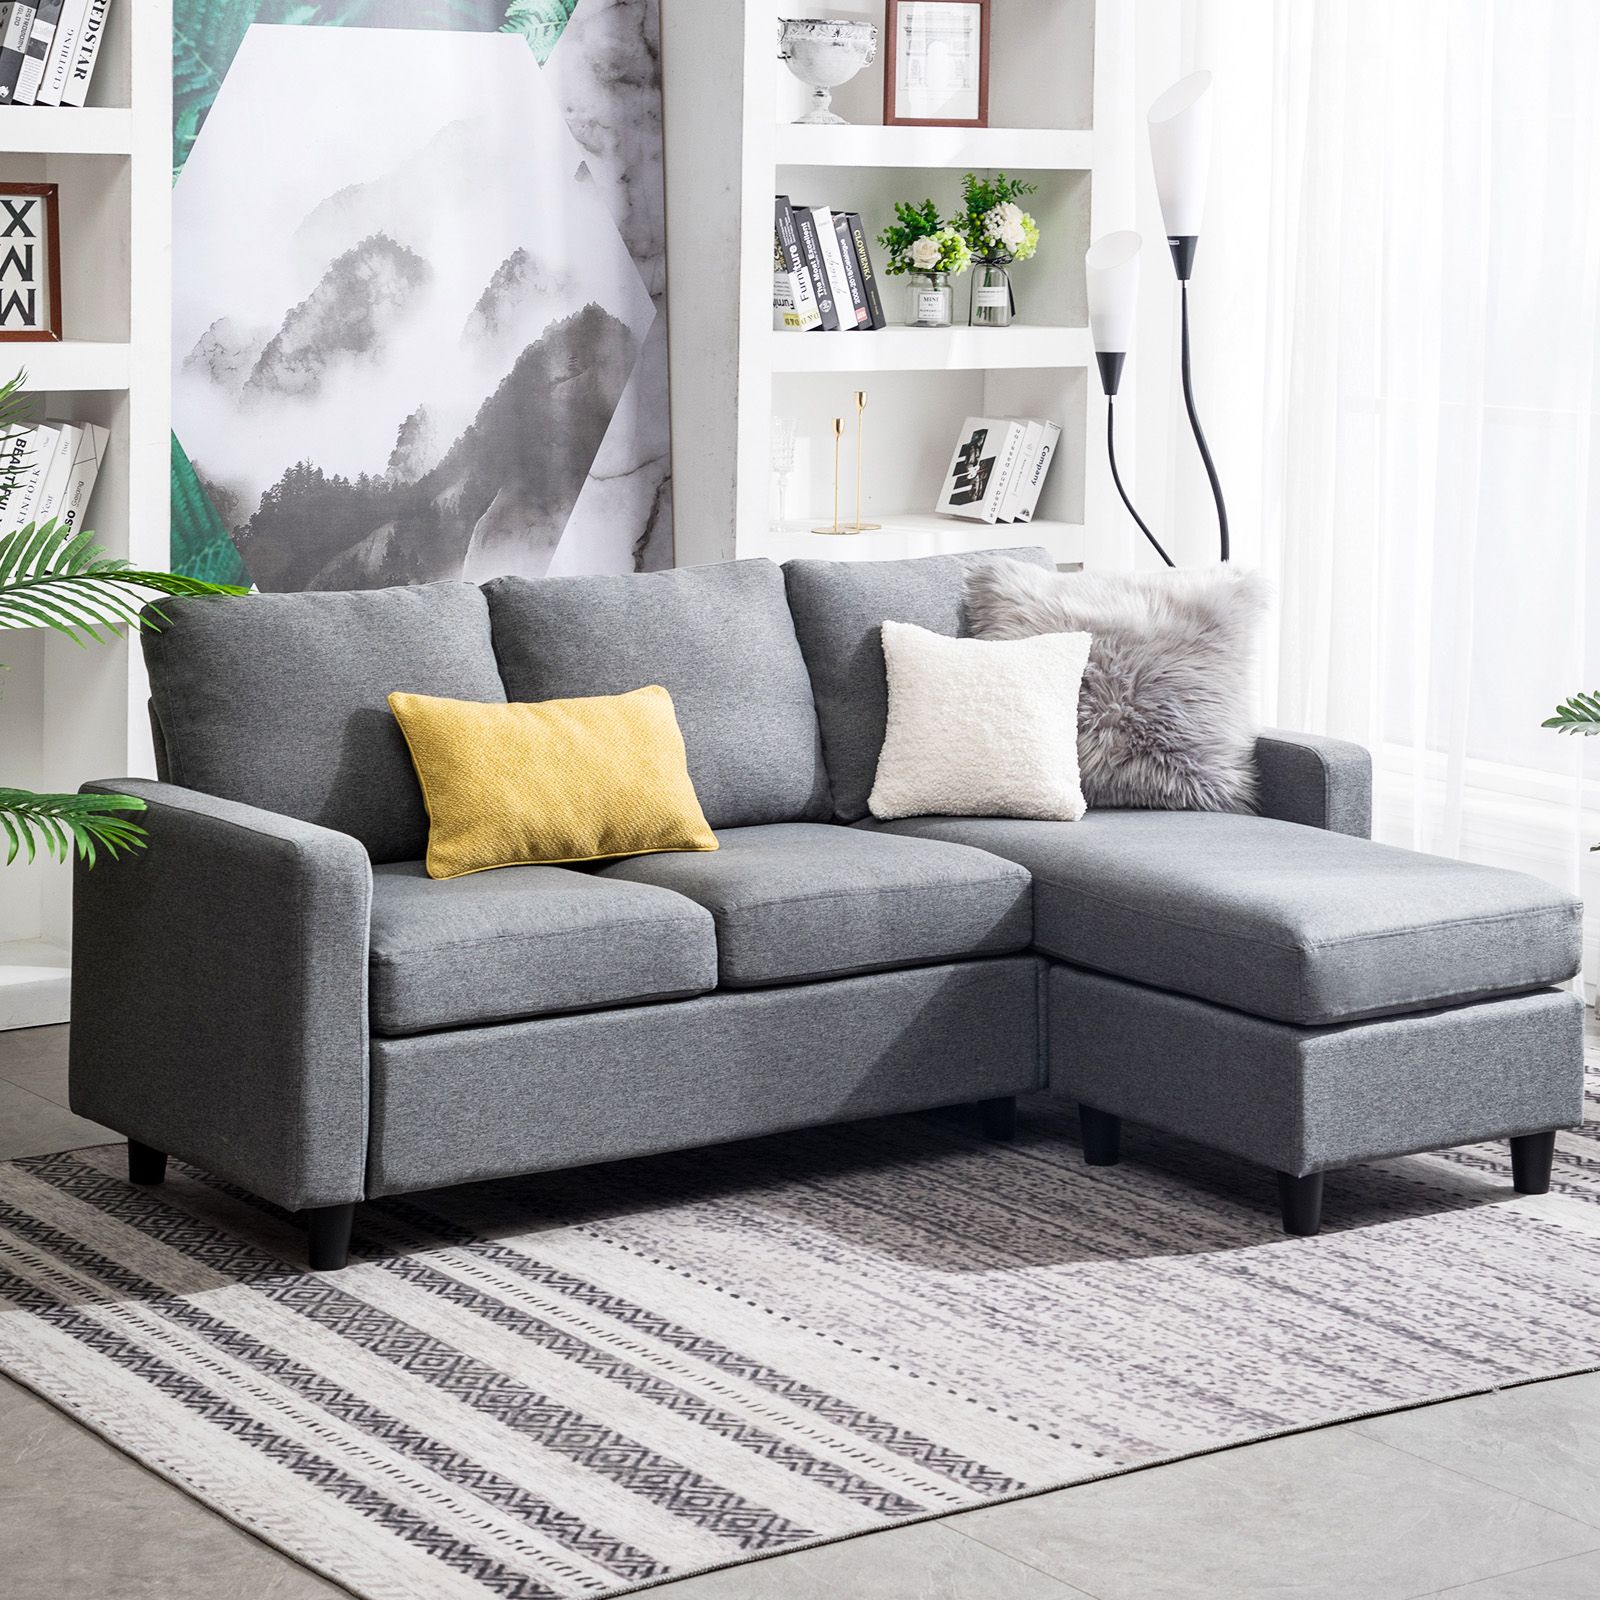 Grey Sectional Sofa L Shaped Couch W/reversible Chaise For Small Space Regarding L Shape Couches With Reversible Chaises (View 4 of 20)